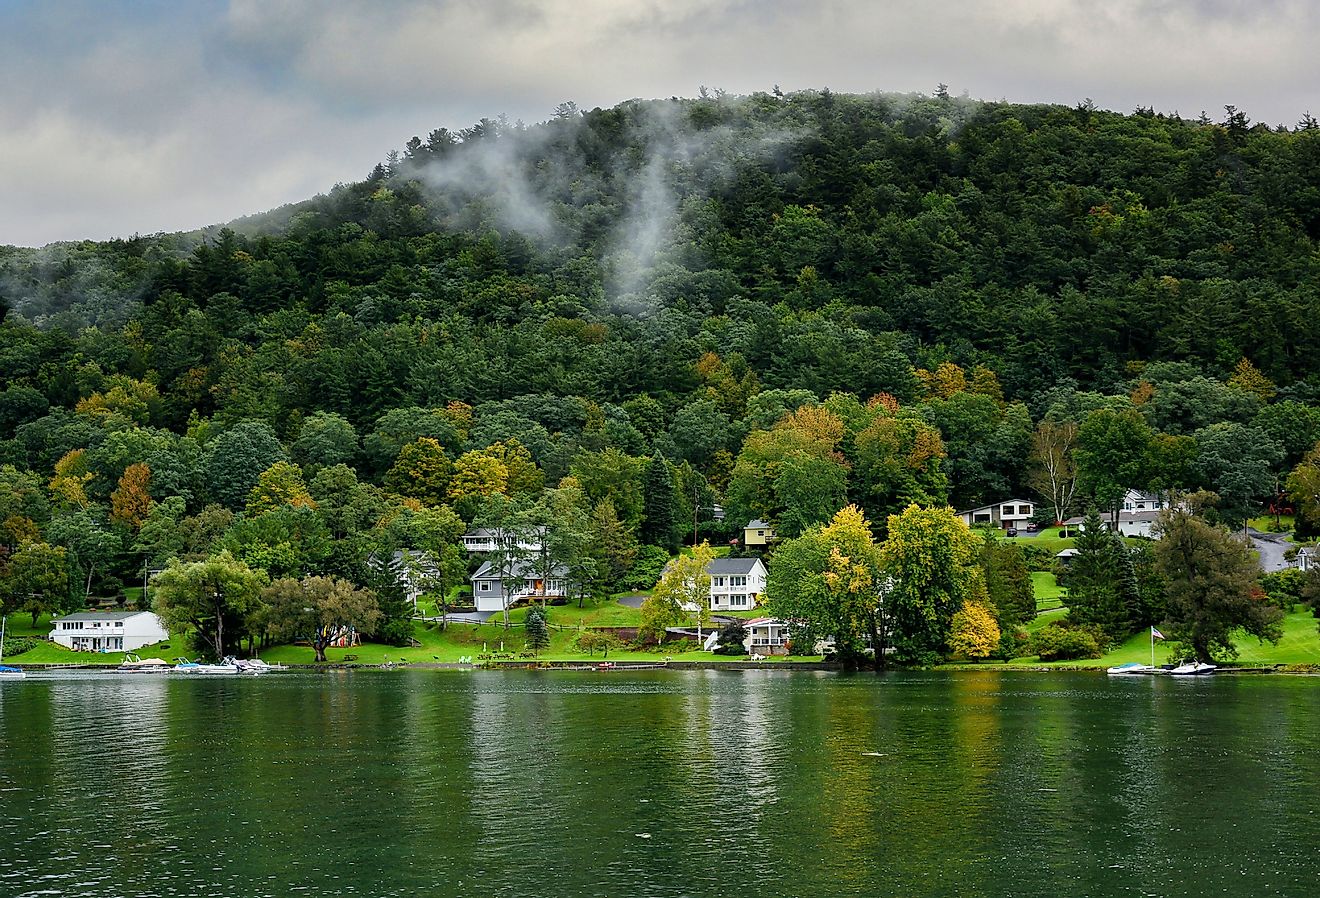 Homes along the shore of Ostego Lake, the source of the Susquehanna River in Cooperstown, New York. Image credit Steve Cukrov via Shutterstock